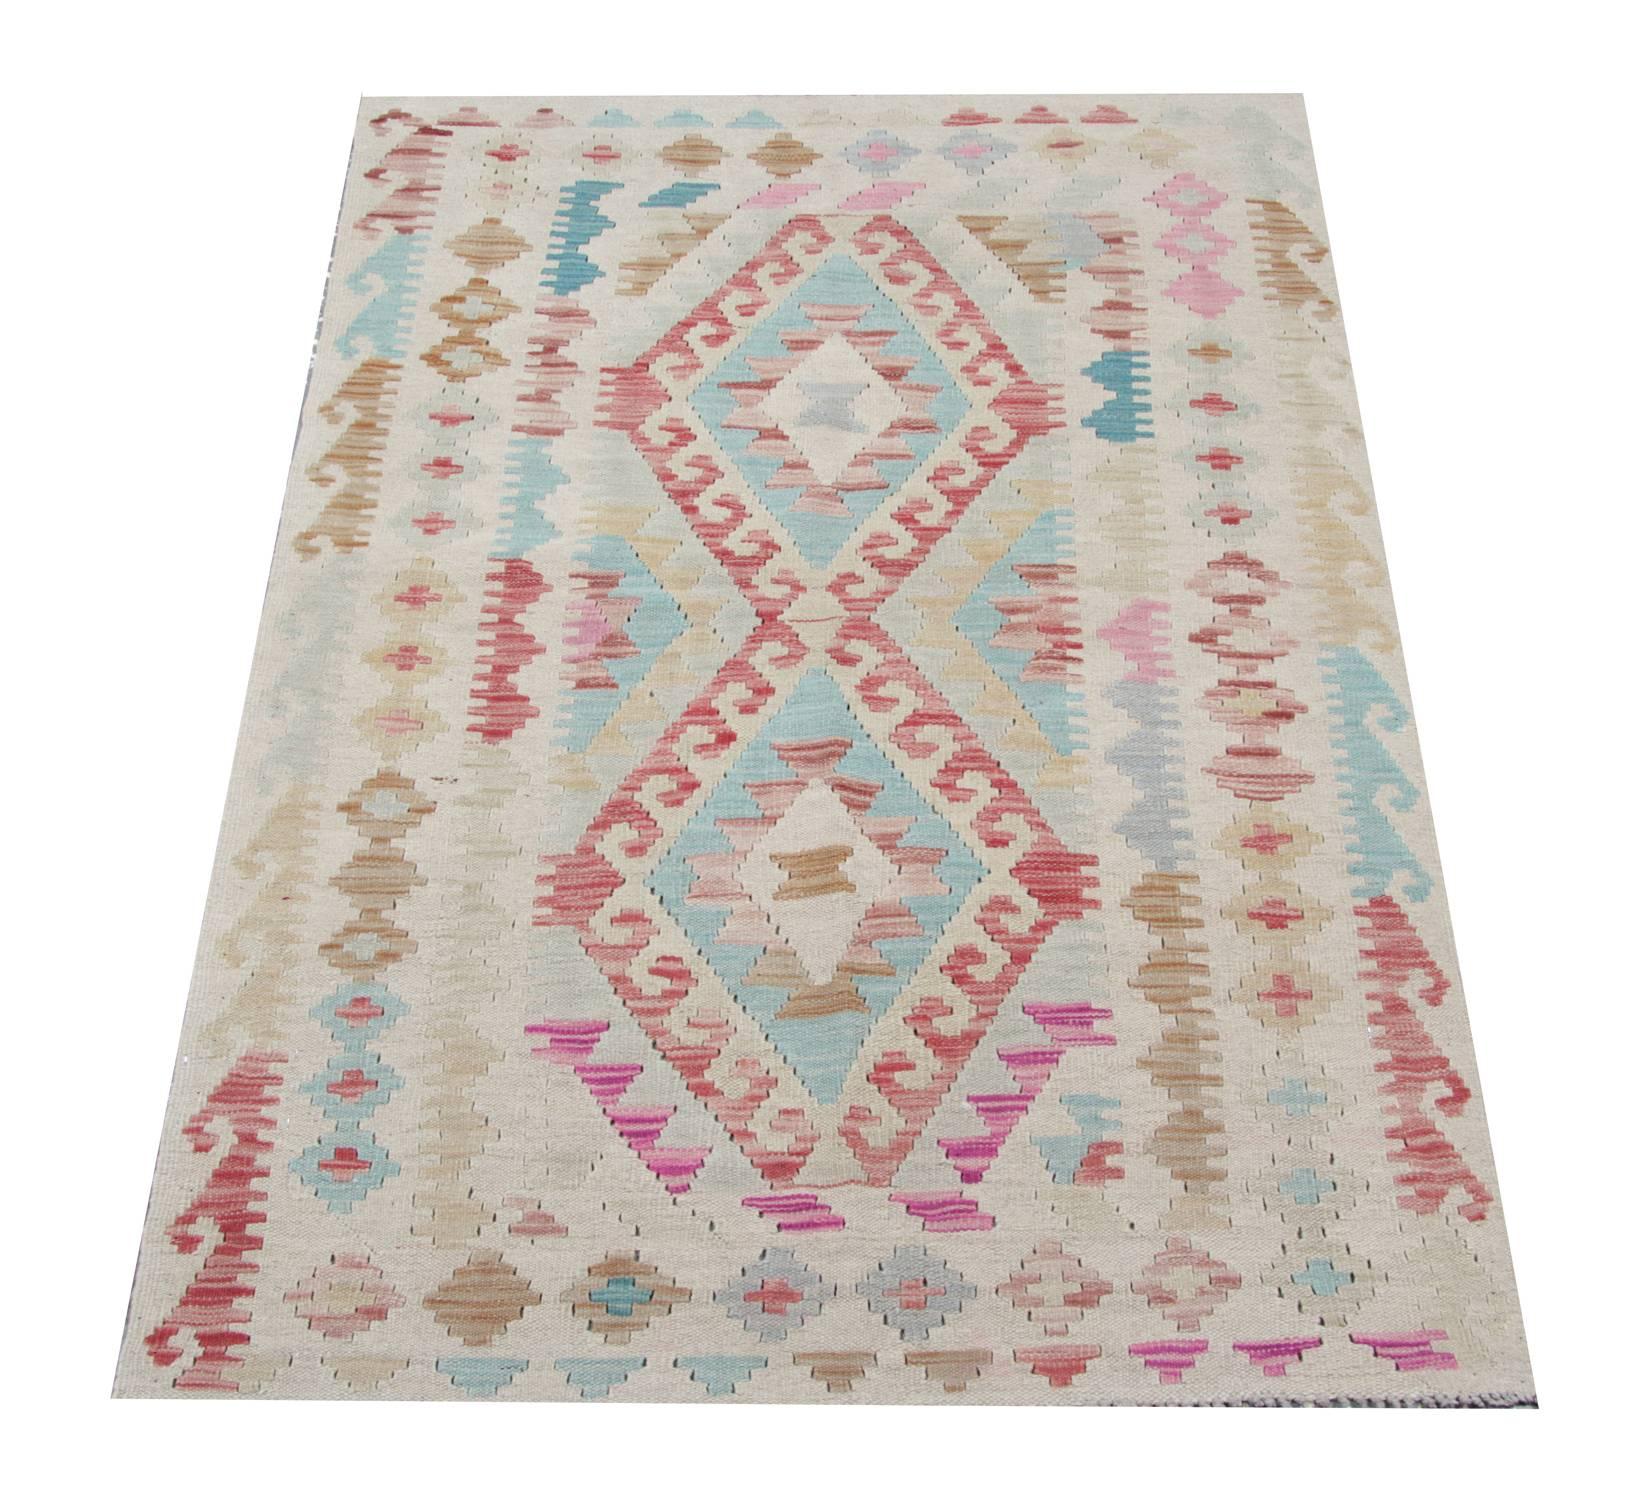 This geometric rug is from the family of Kilim rugs in the North of Afghanistan by Uzbek and Turkmen tribes. The materials used for the production of these handmade rugs are wool and cotton. Only organic dyes have been used for these colorful rugs.